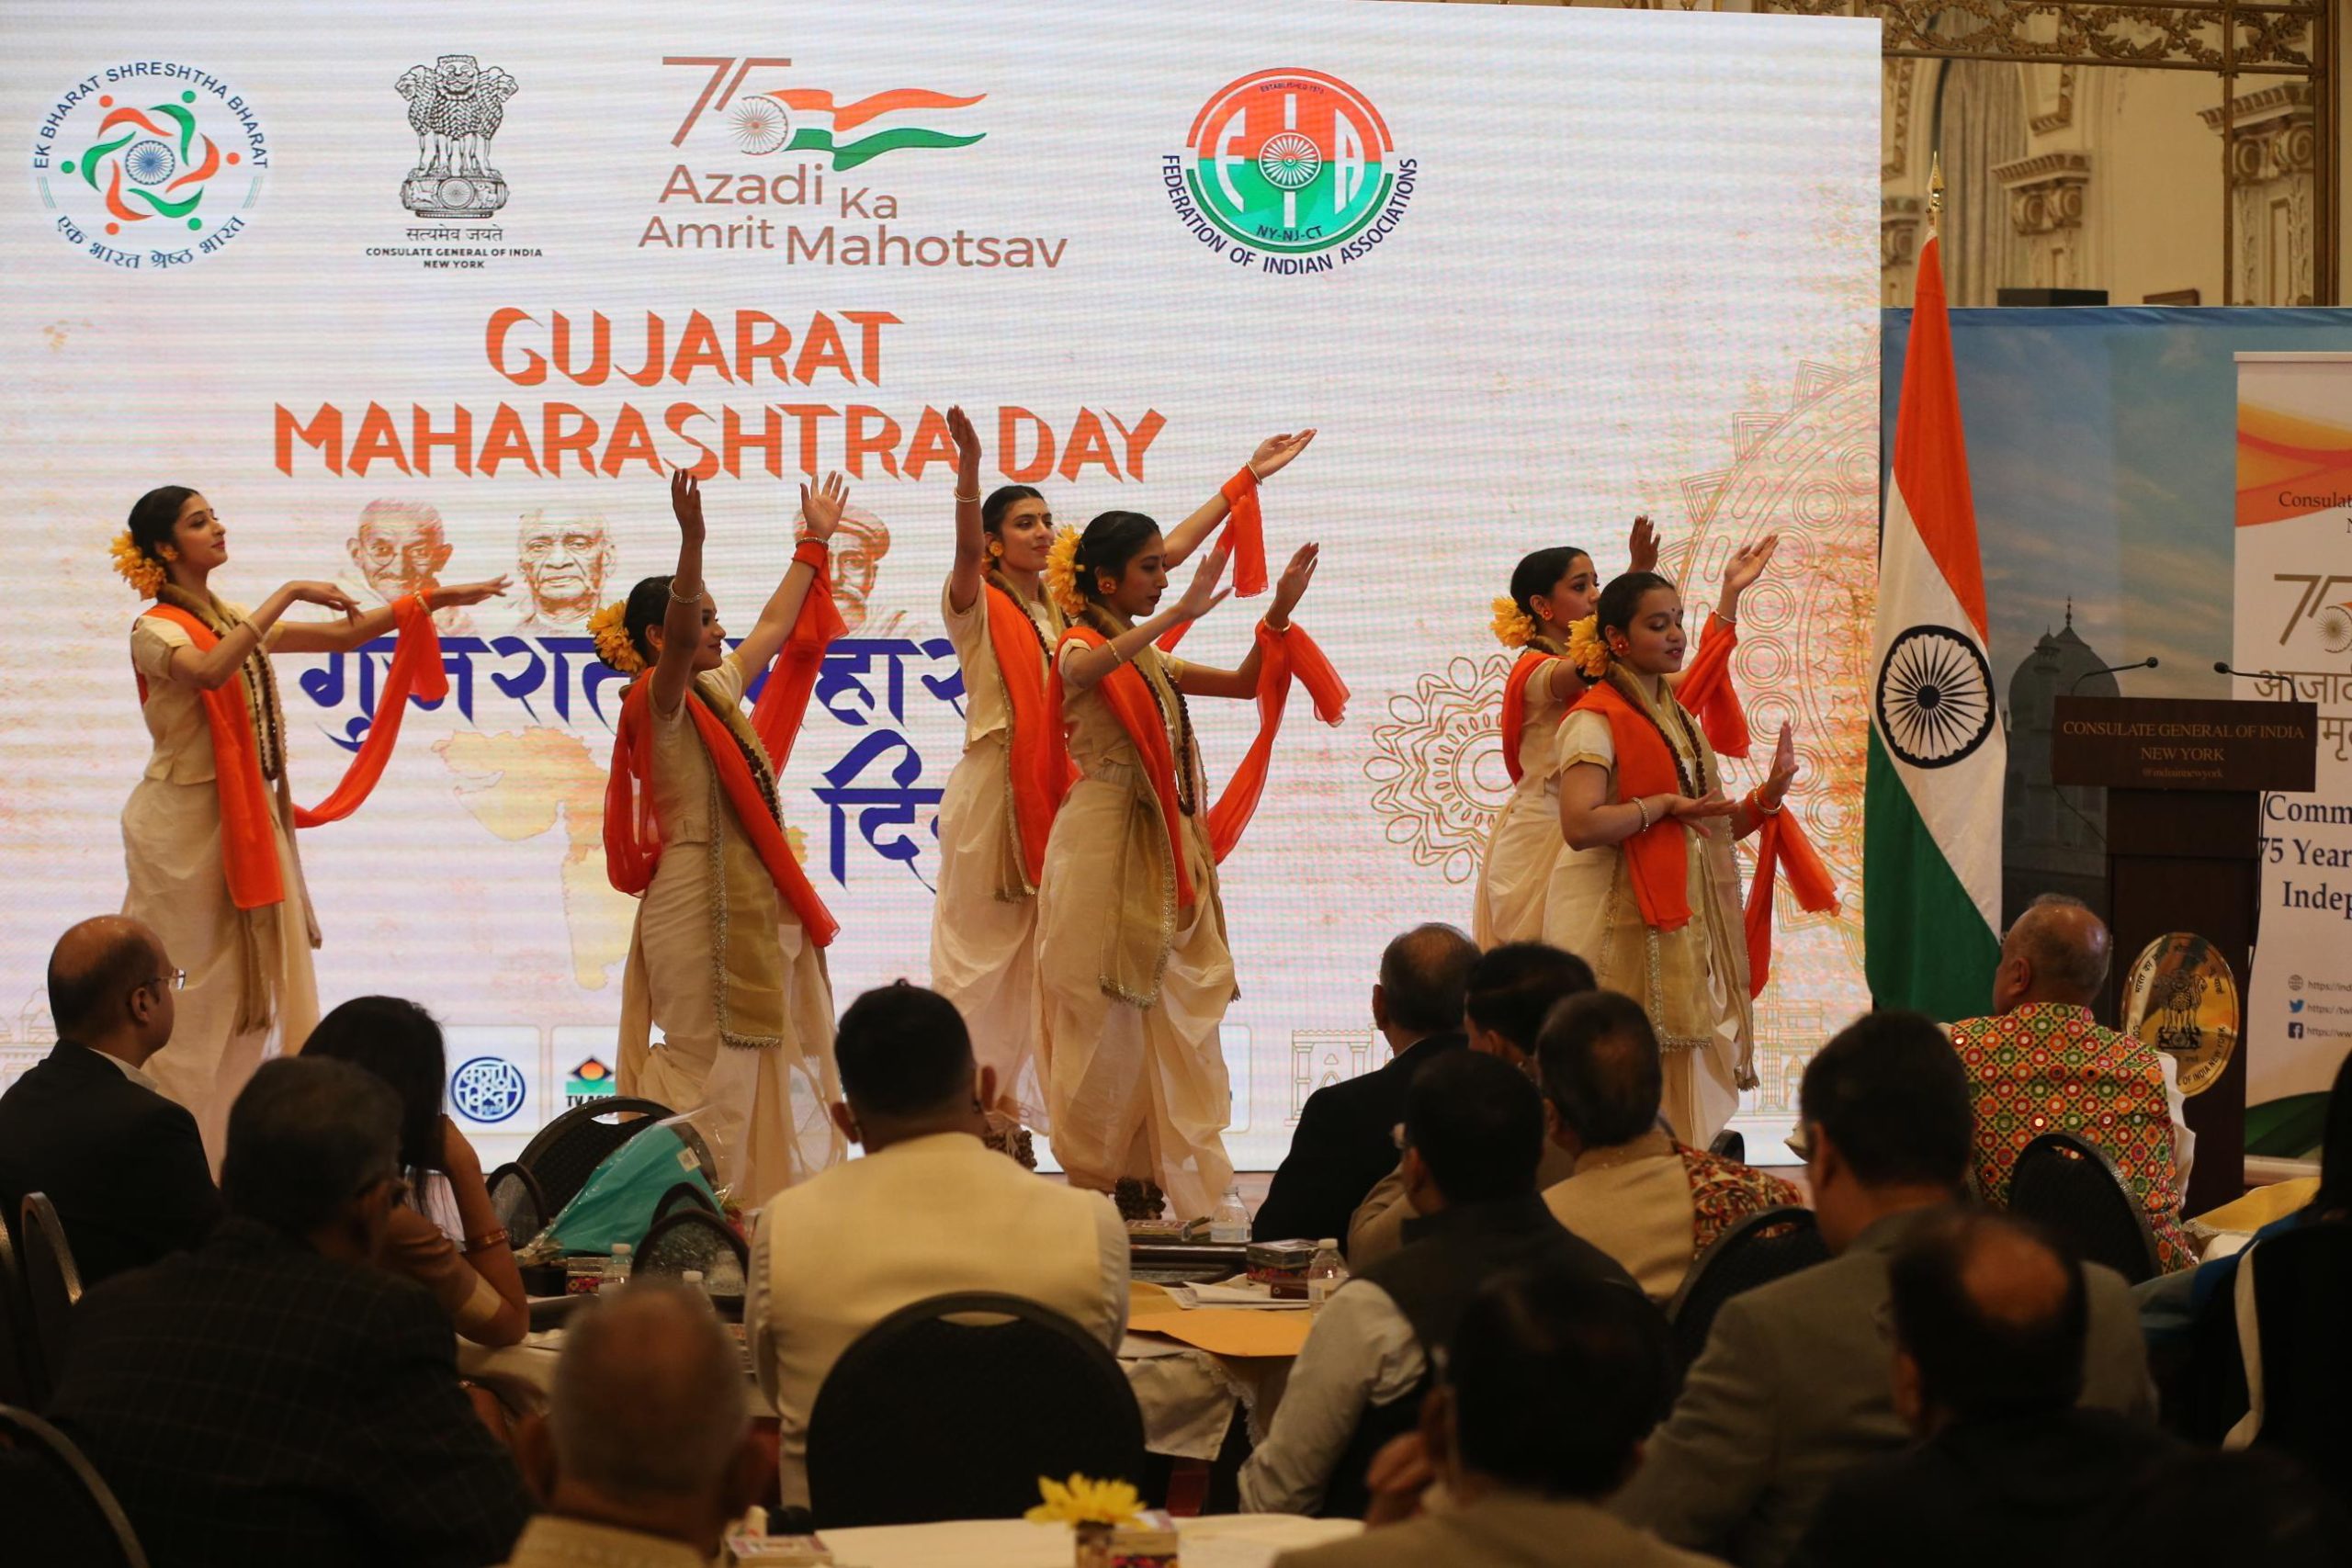 Gujarat Maharashtra Day celebrated at Indian Consulate in New York